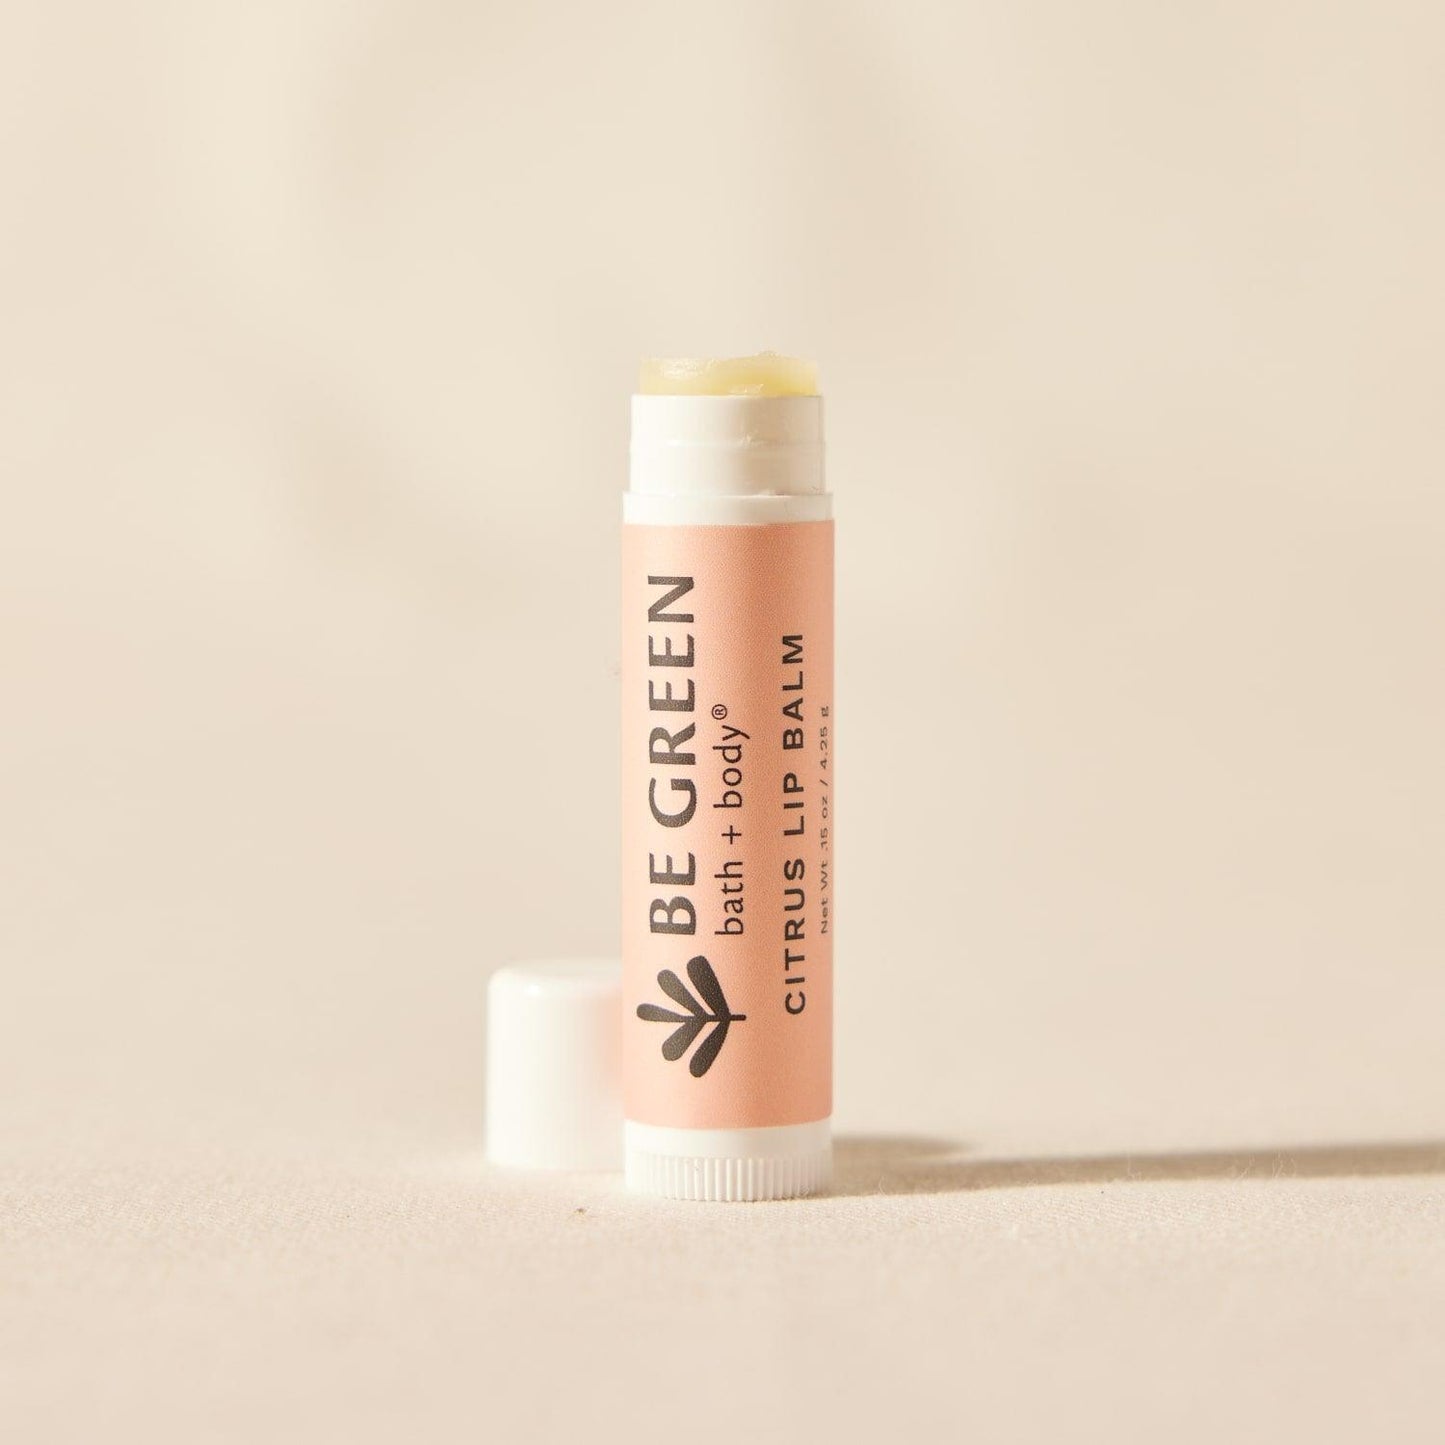 All natural beeswax lip balm with citrus essential oil and zinc oxide.